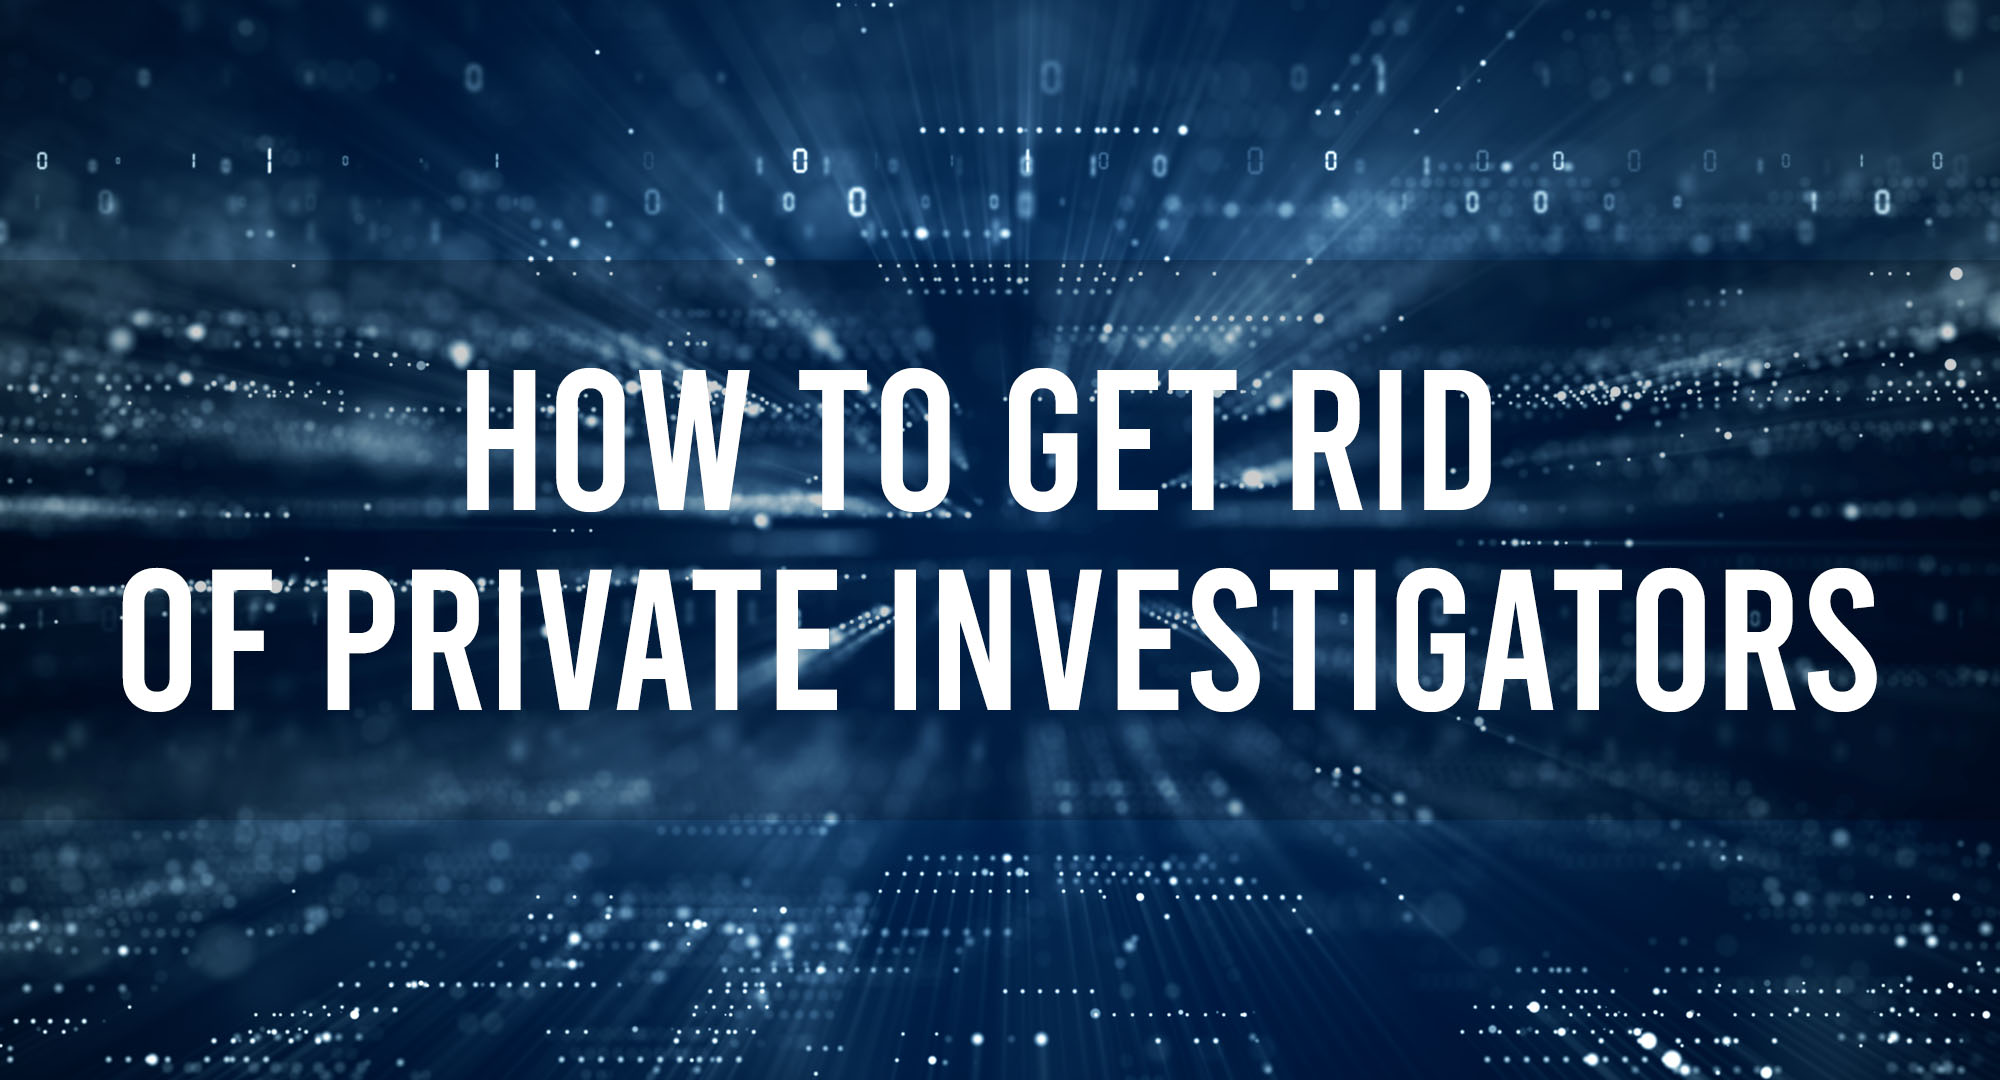 How to get rid of private investigators